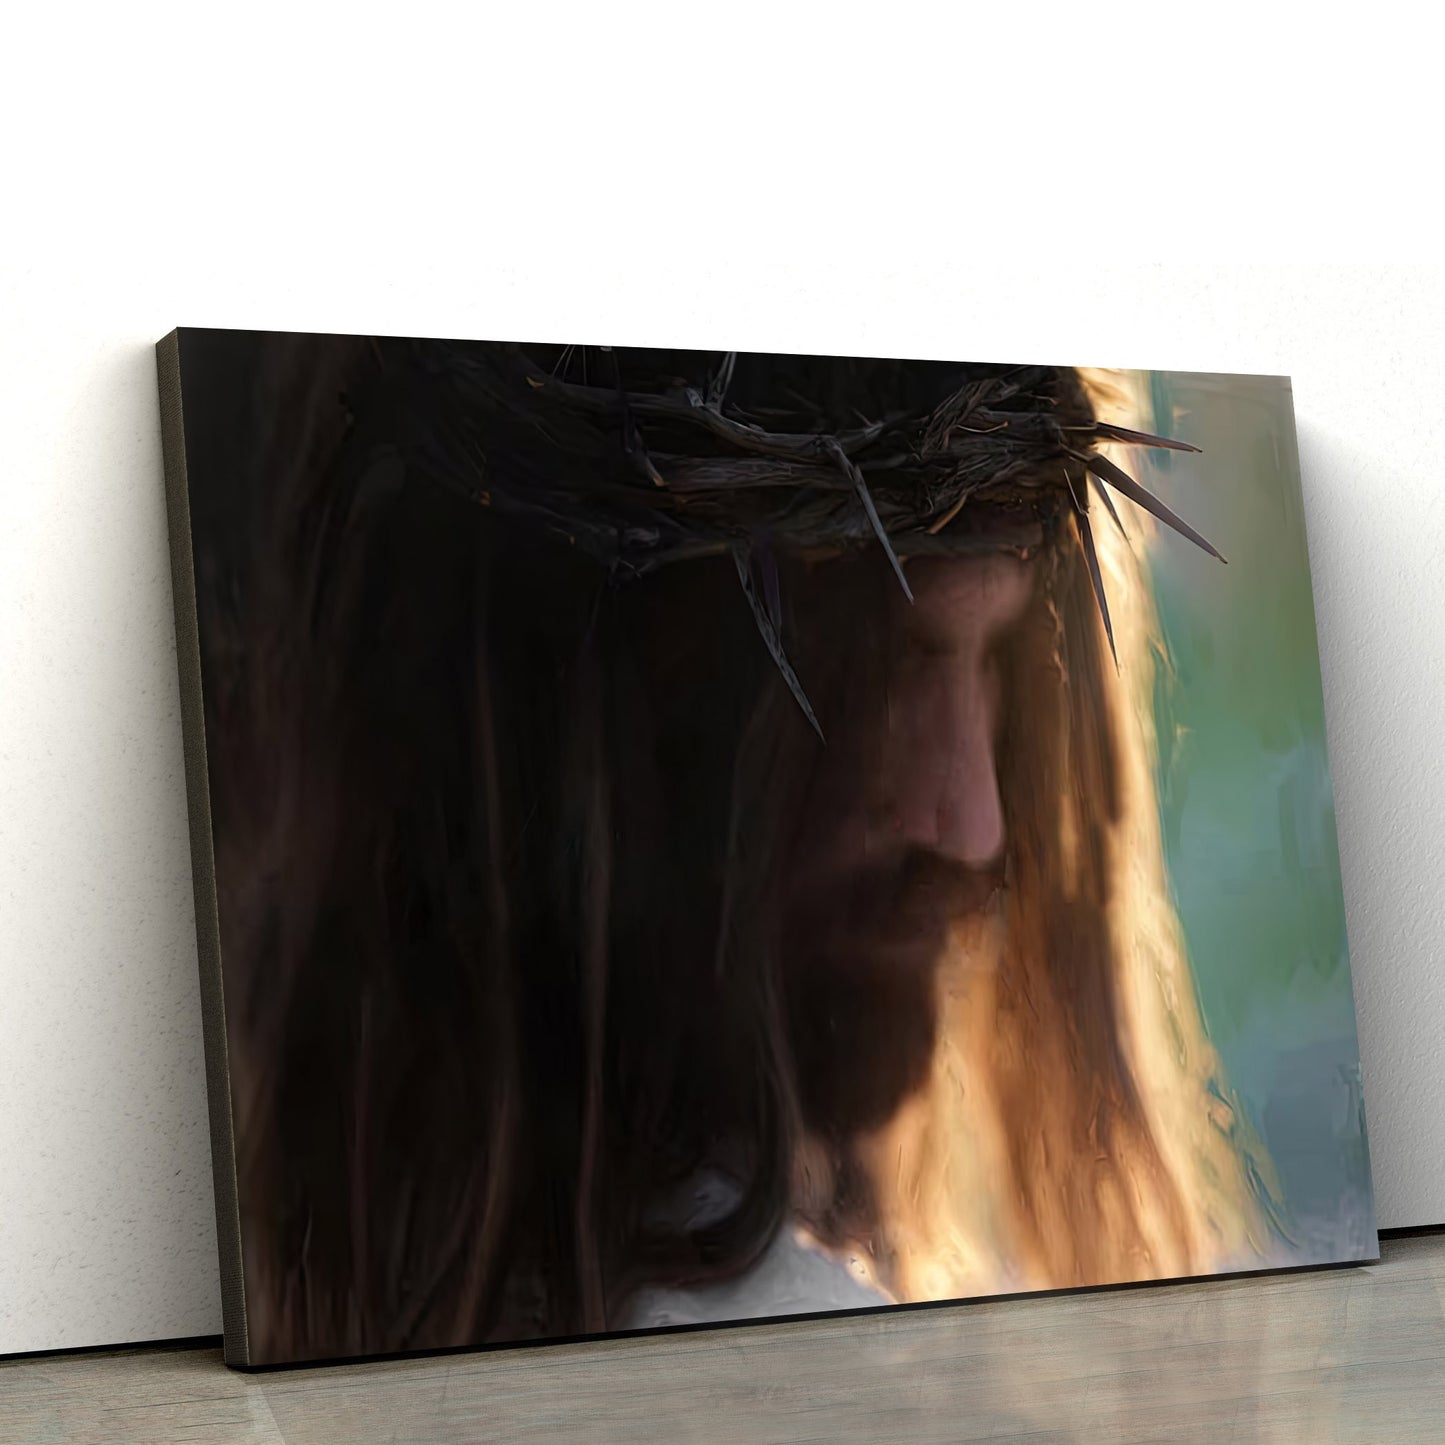 Jesus Christ With Crown Of Thorns Canvas Art - Jesus Christ Pictures - Jesus Wall Art - Christian Wall Decor